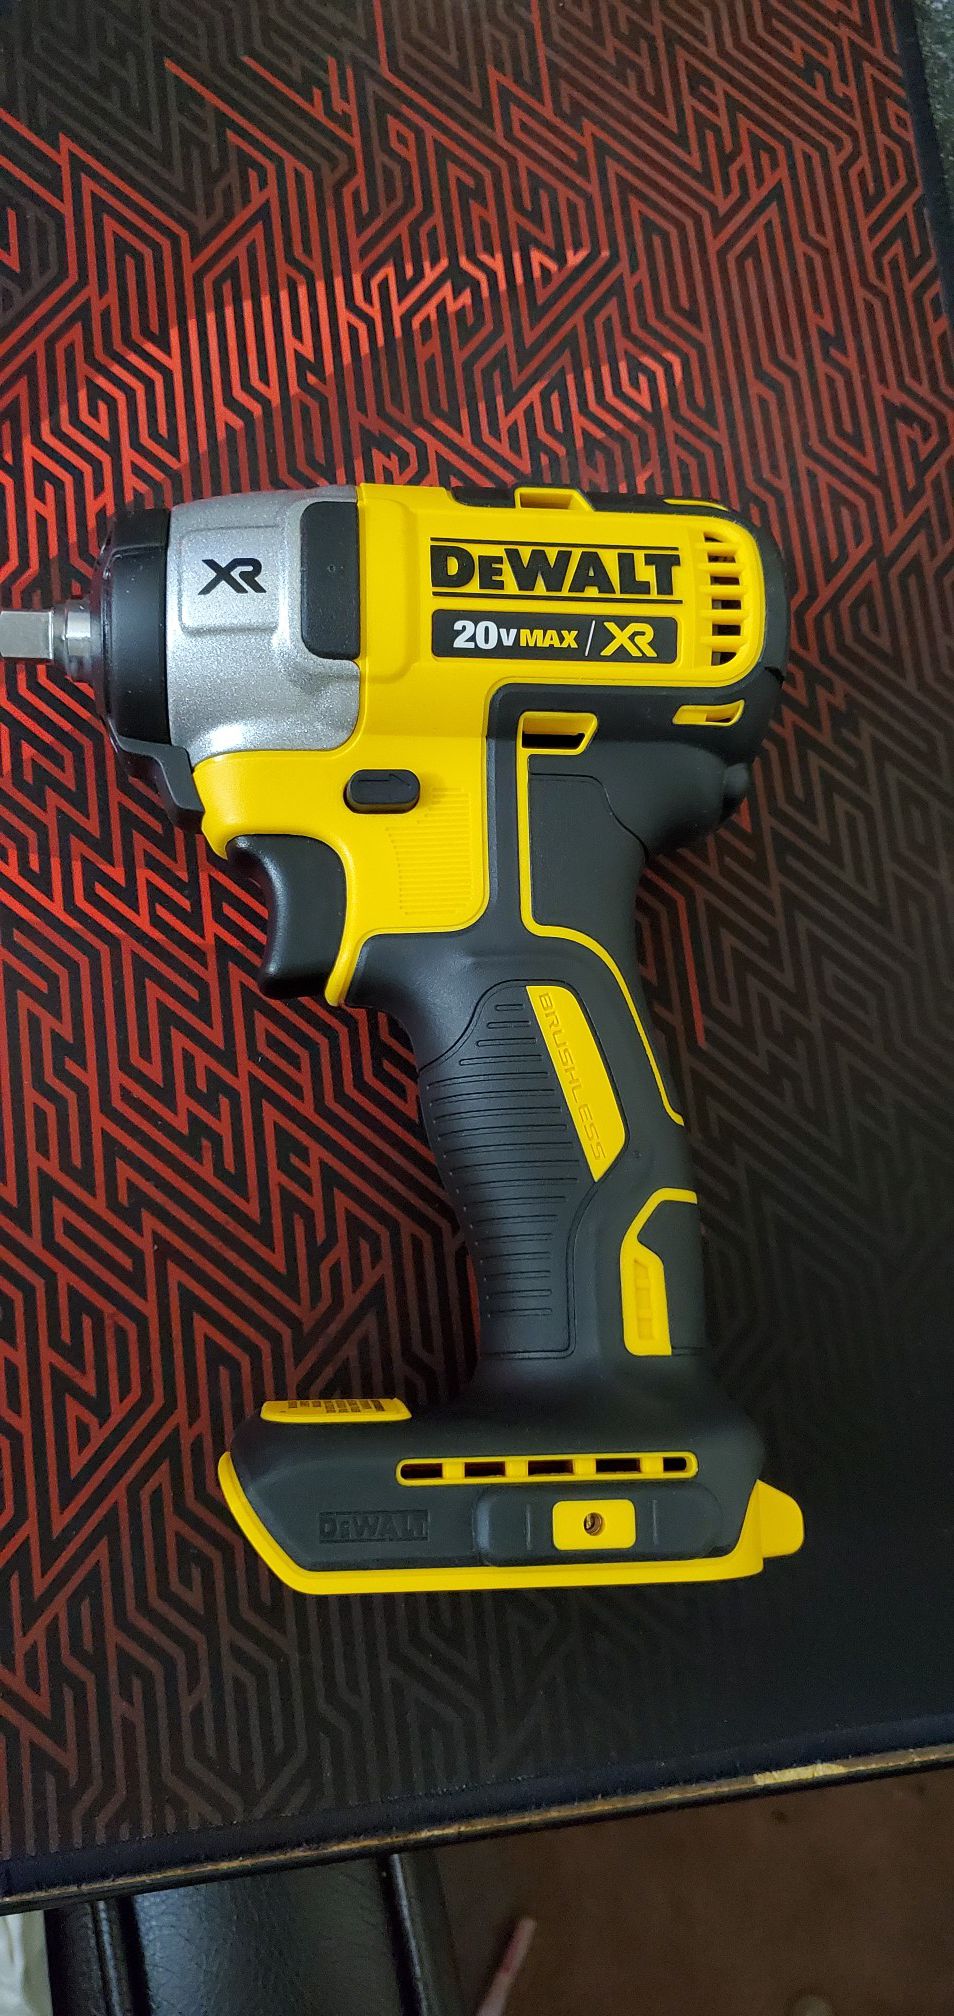 Dewalt 3/8th impaxt brushless xr drill new WITH 5AH BATTERY